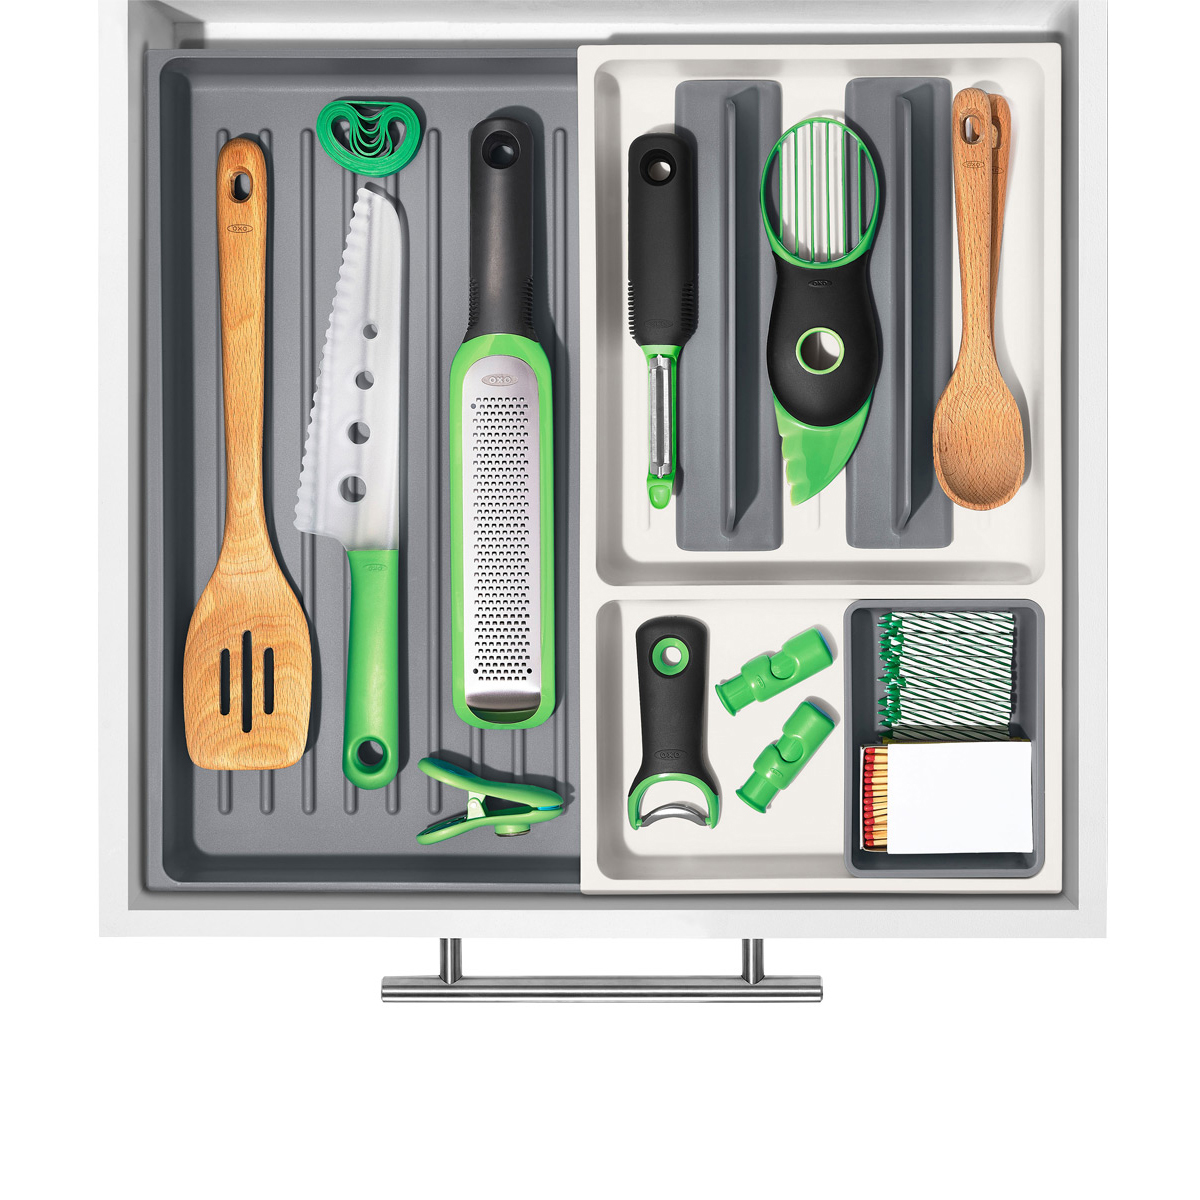 https://www.containerstore.com/catalogimages/443057/10088252-OXO-Large-Expandable-Tool-D.jpg